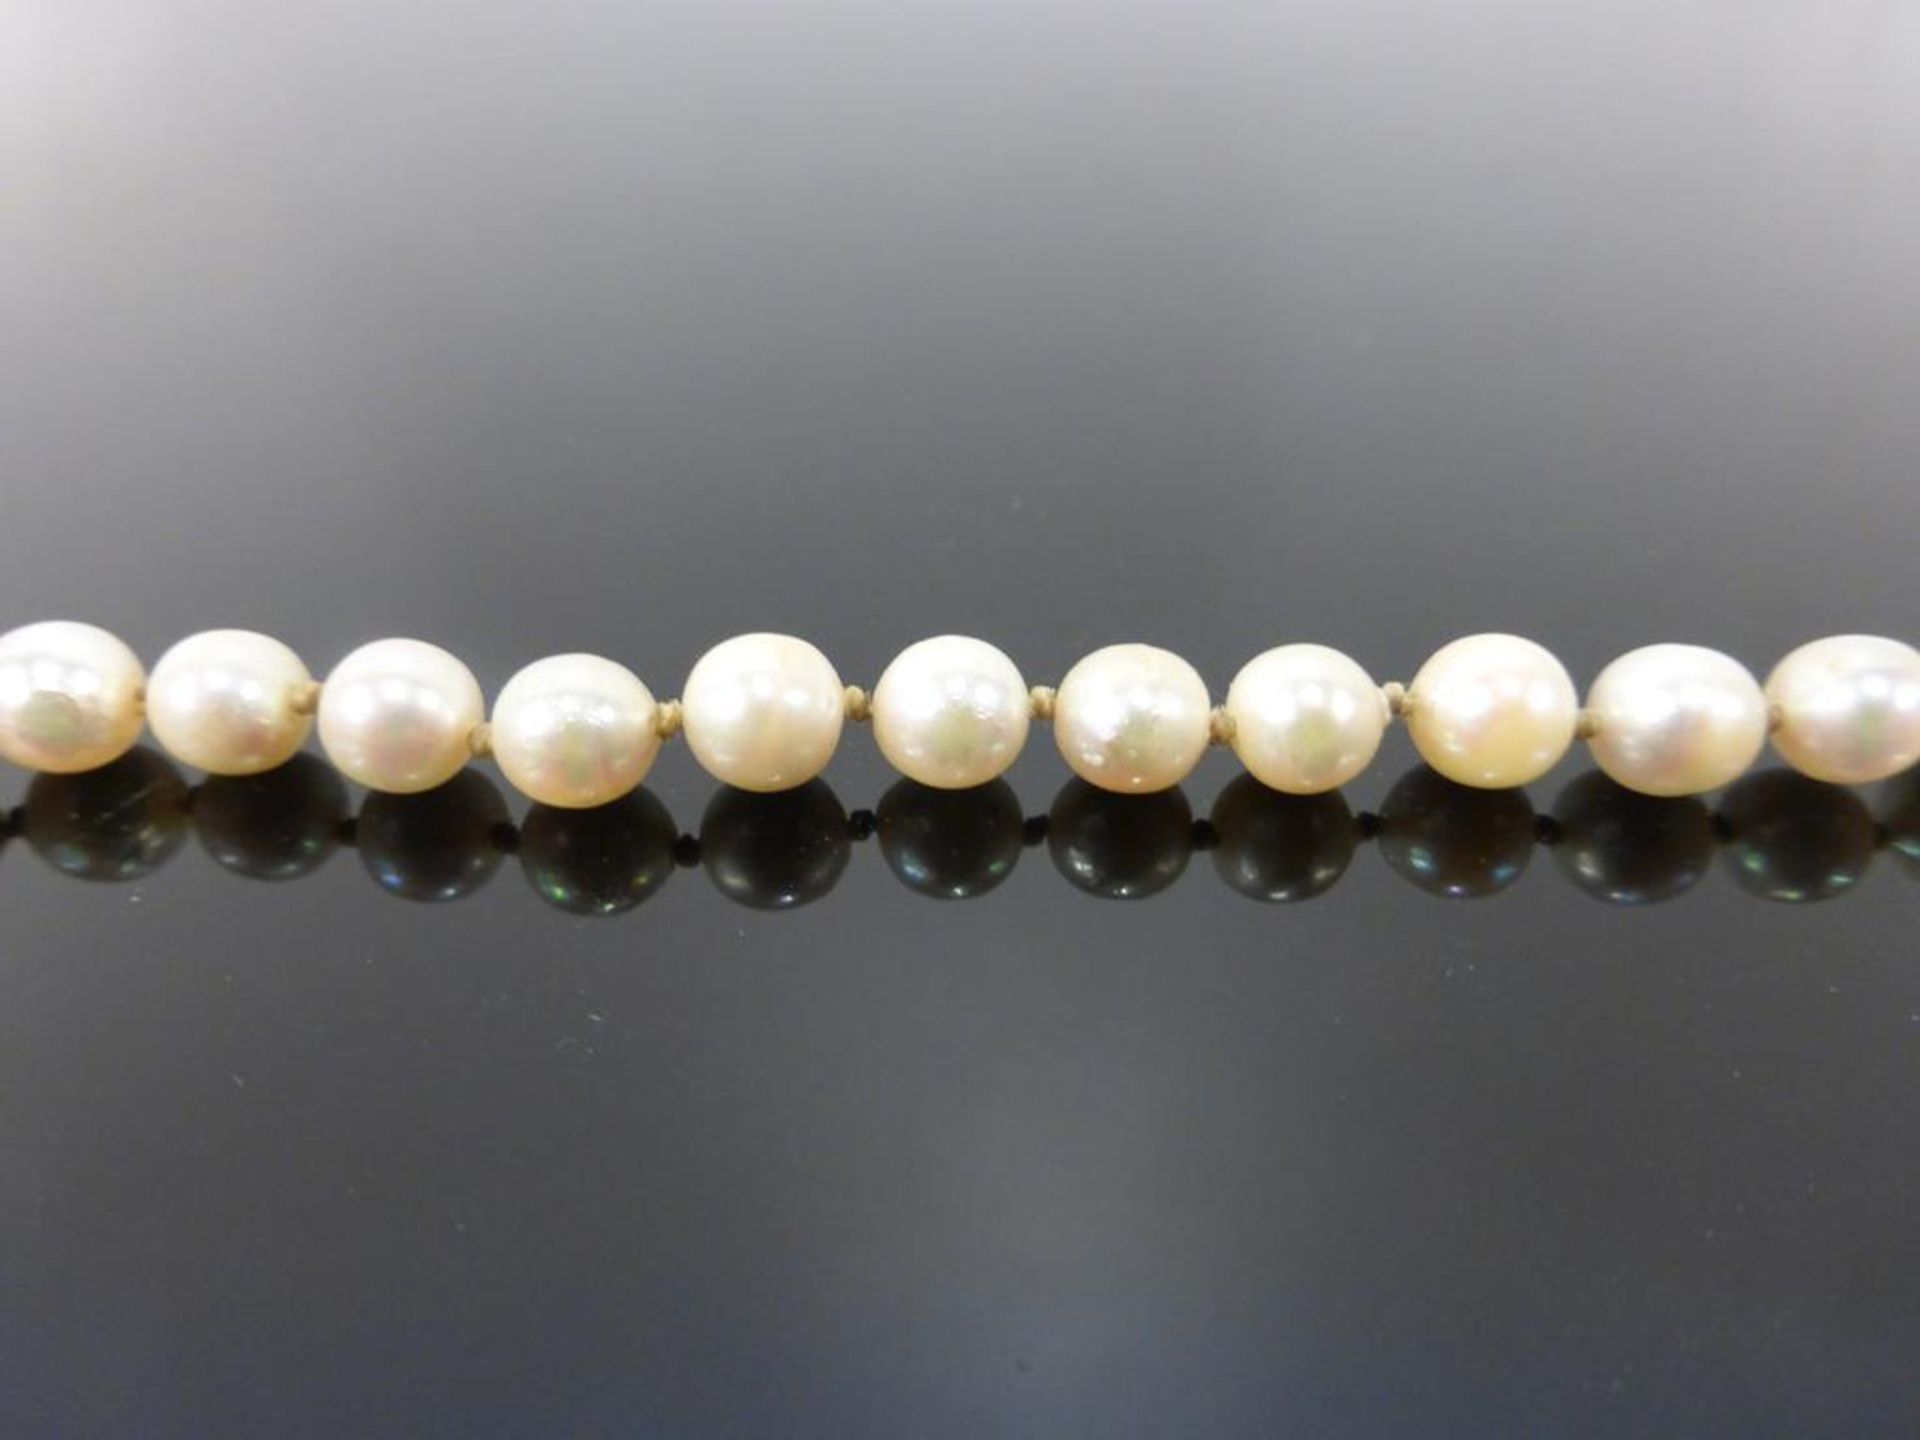 A Cultured Pearl Necklace with a Silver Clasp - Image 2 of 3